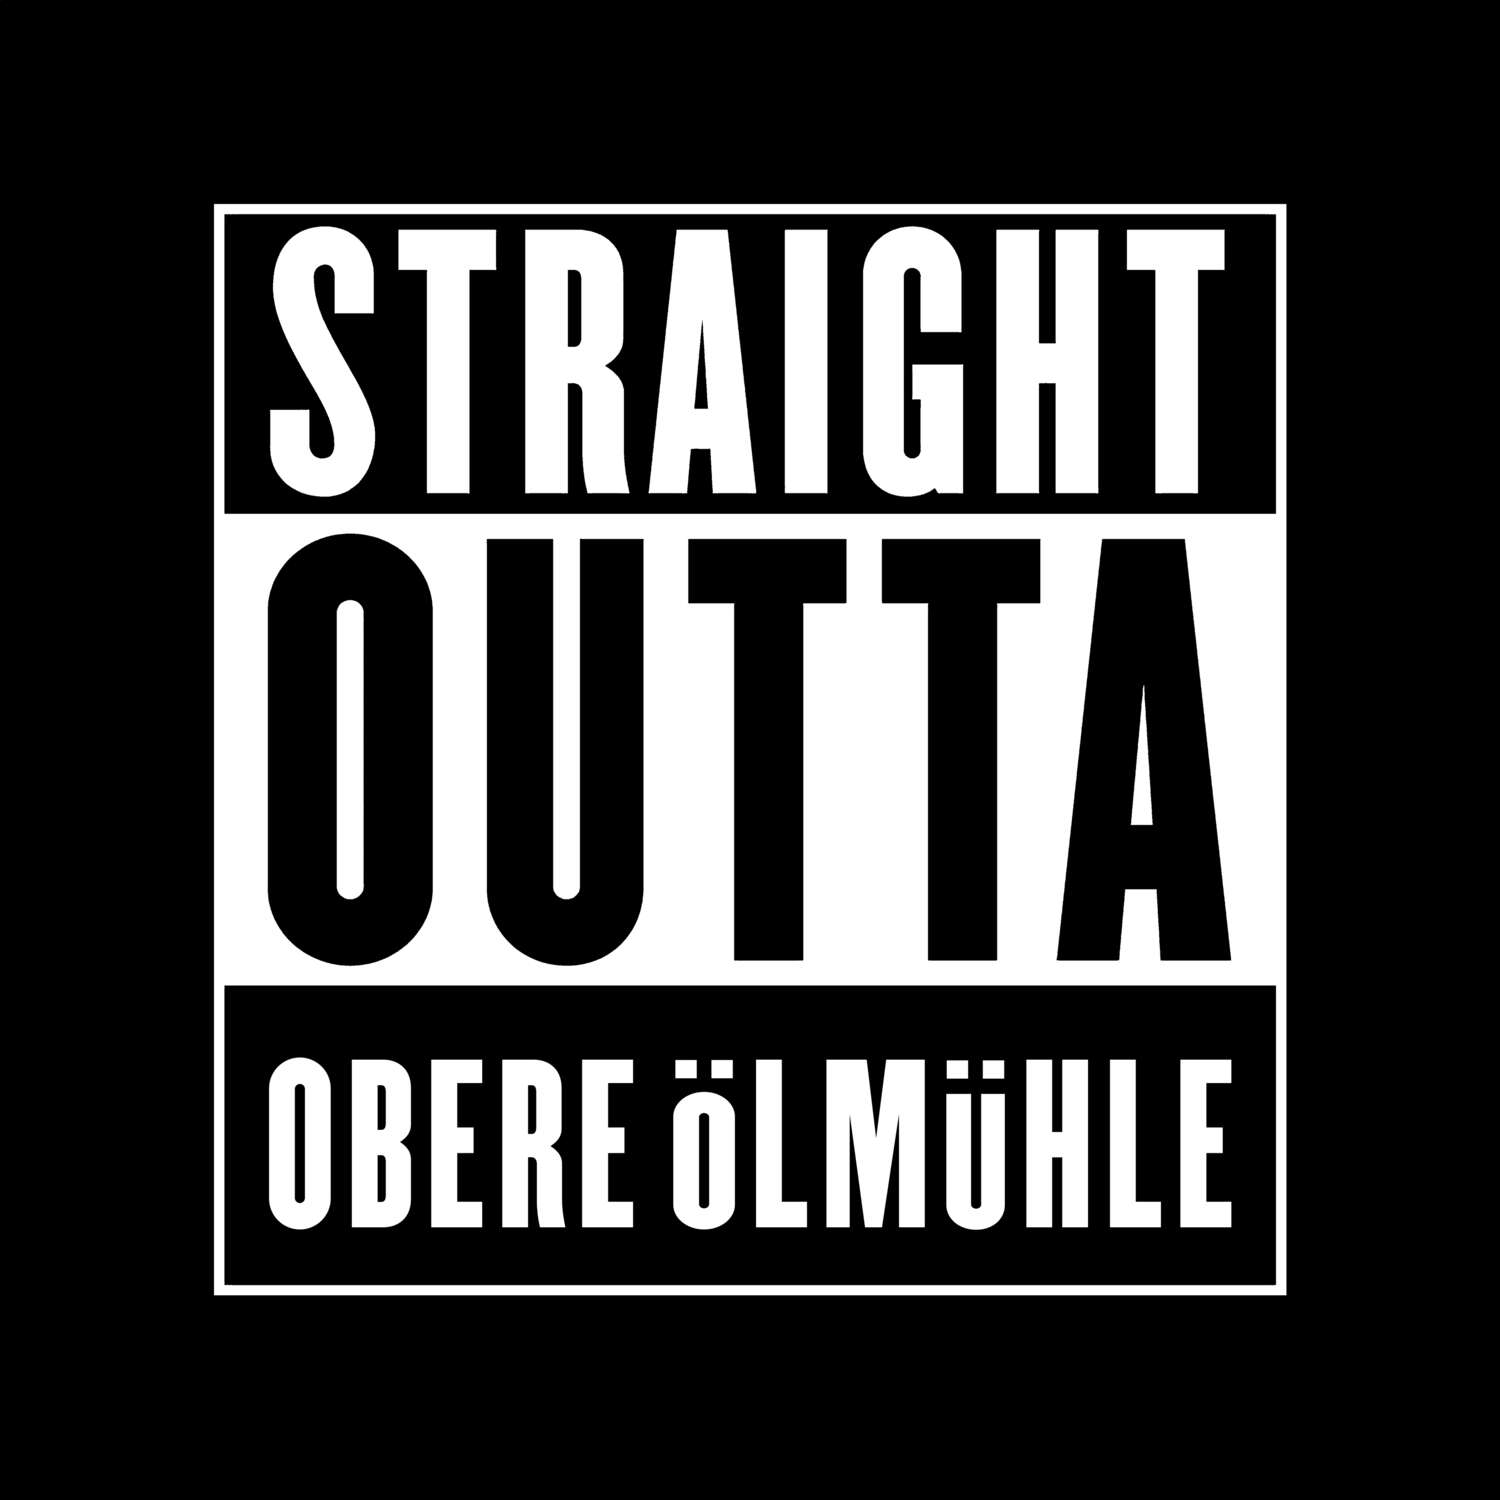 Obere Ölmühle T-Shirt »Straight Outta«